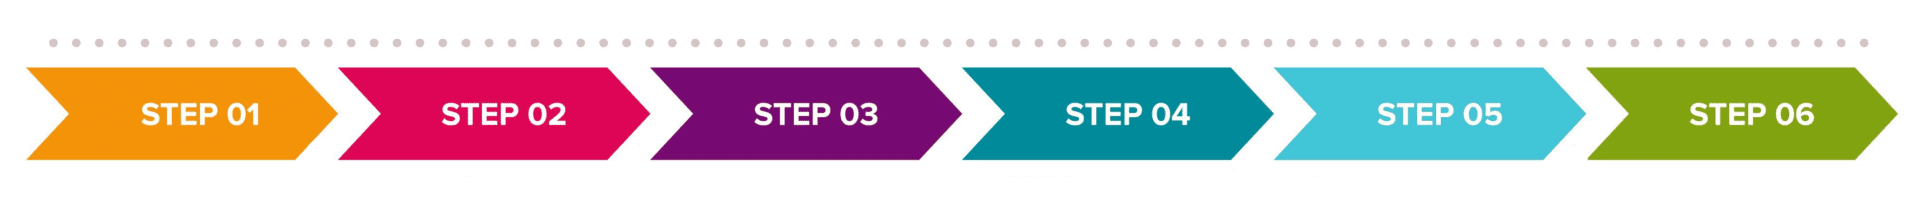 A purple arrow and some green arrows on a white background